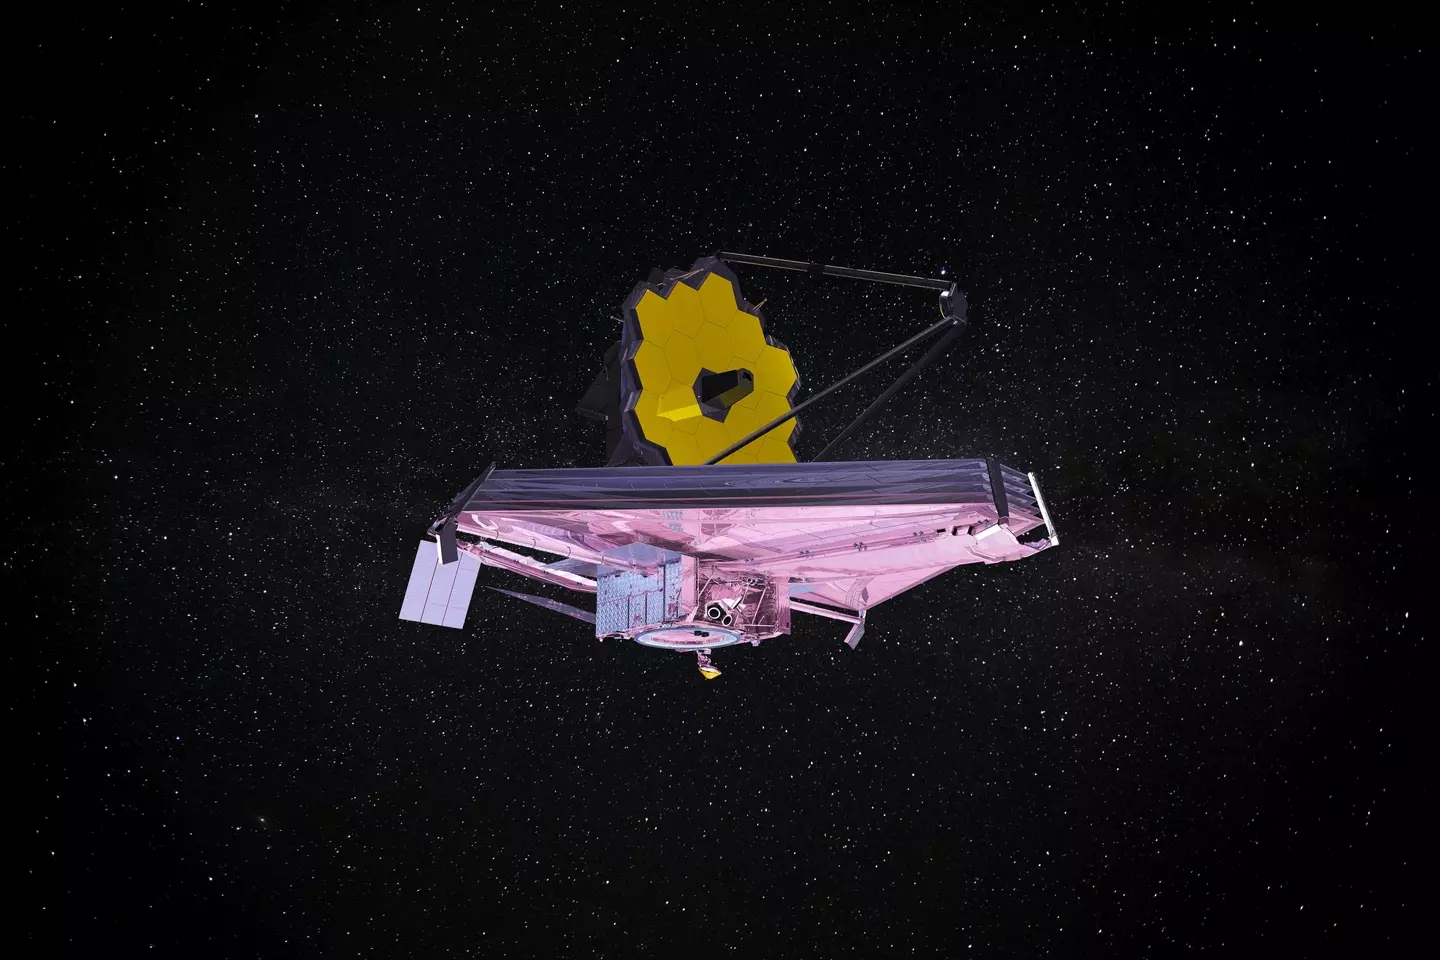 The James Webb Space Telescope is the most powerful telescope on Earth.